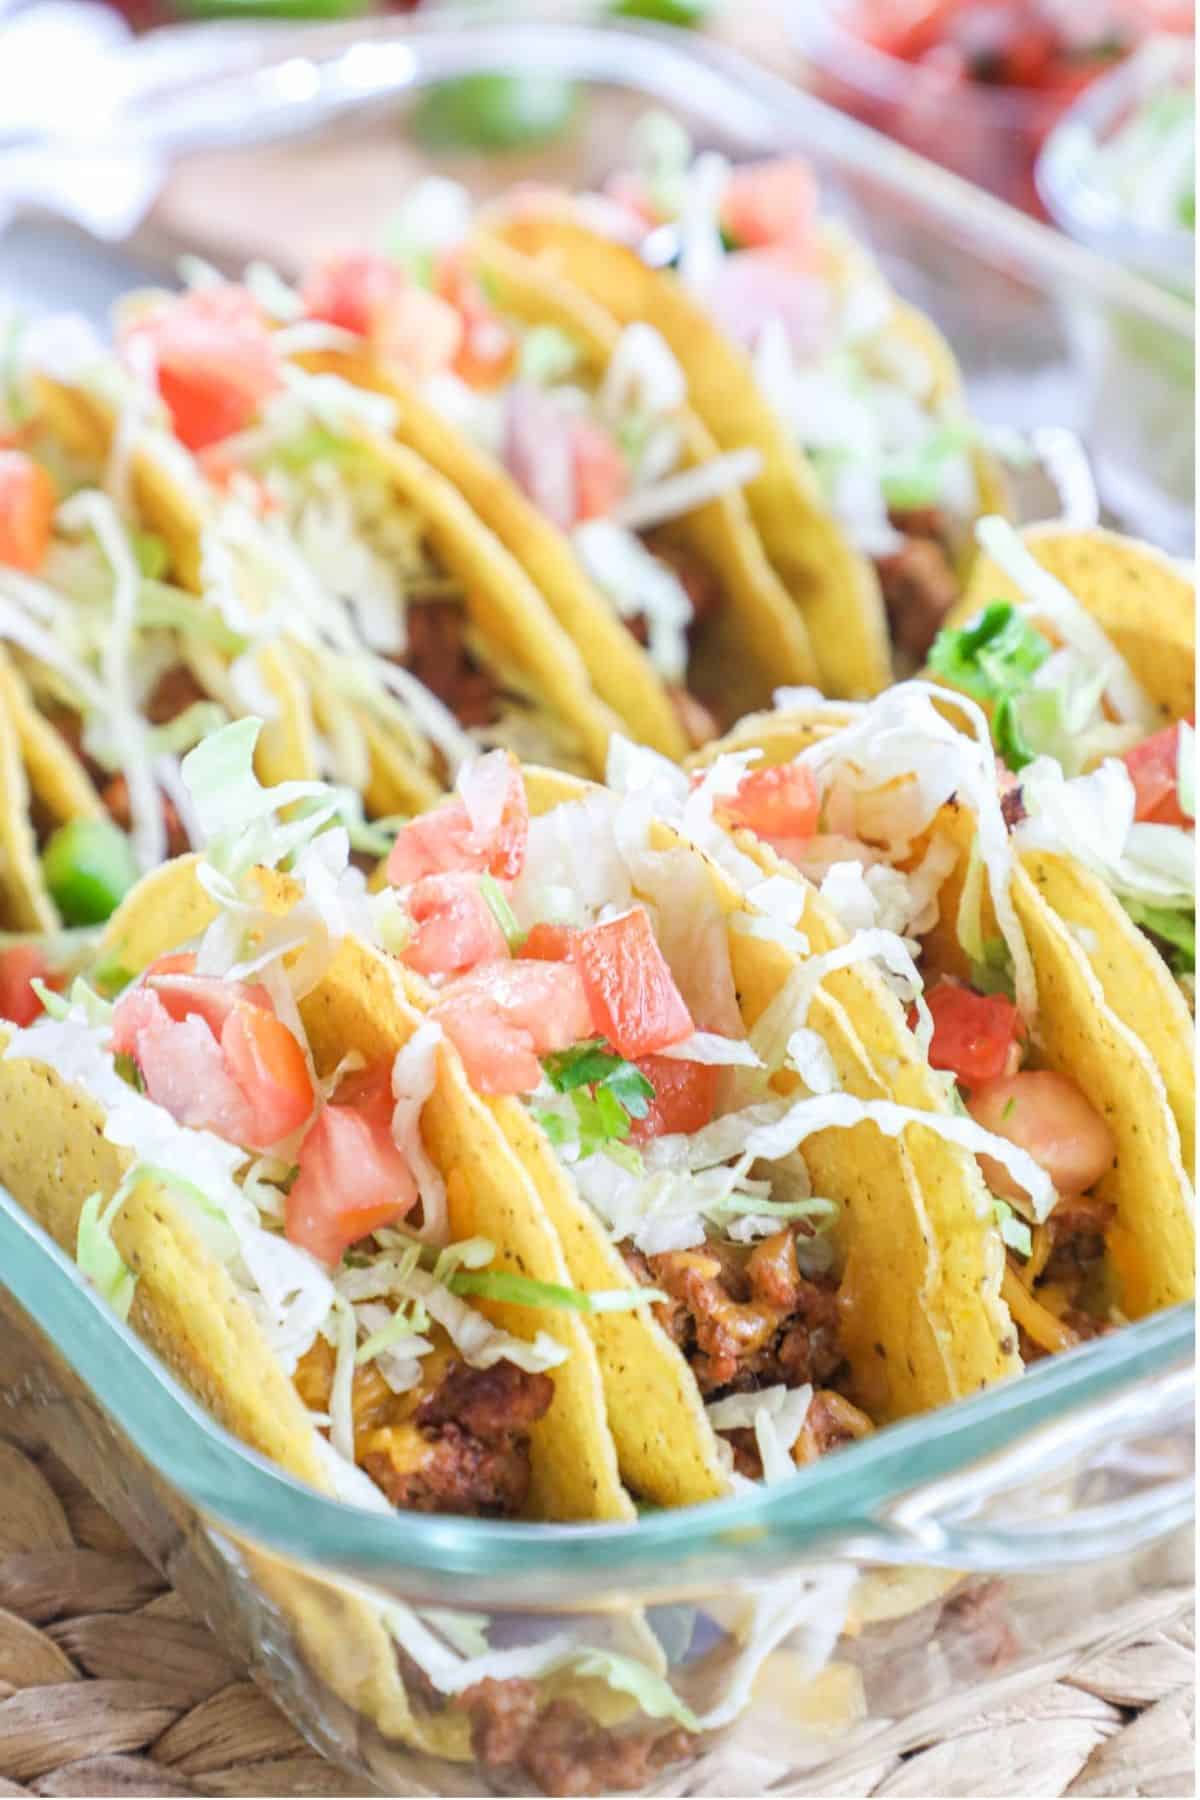 Crispy Baked Tacos in a glass casserole dish